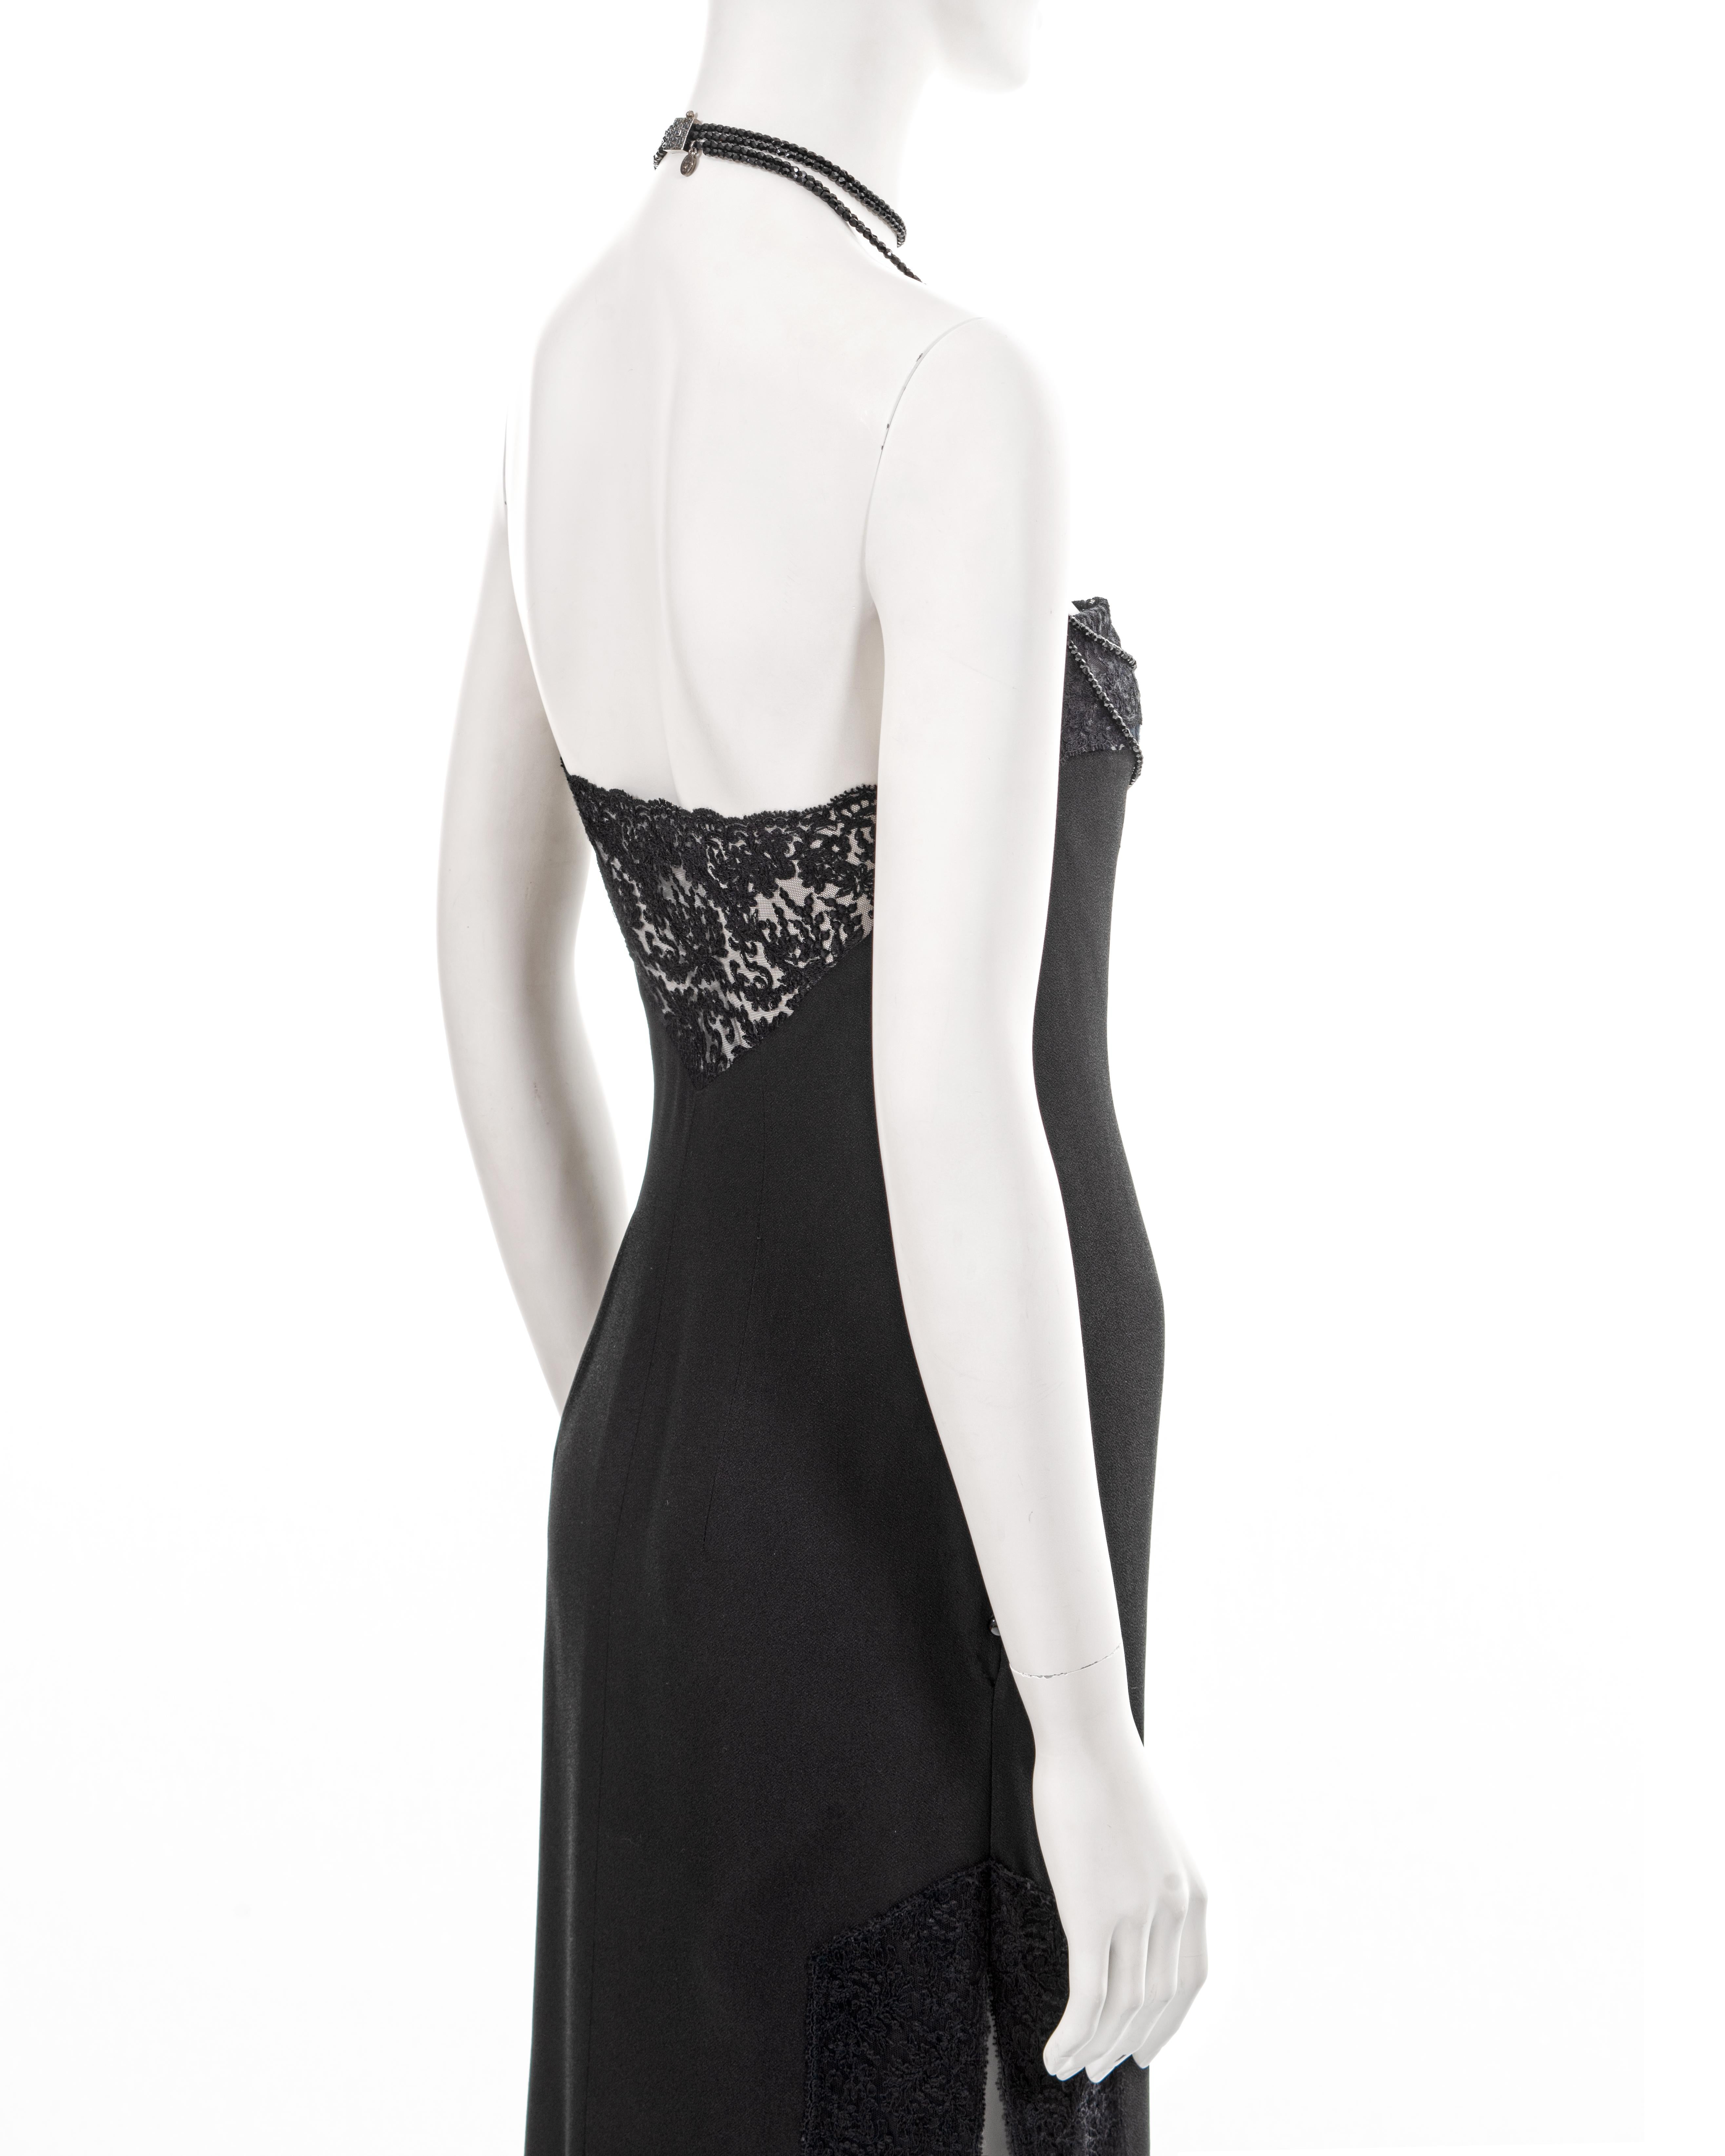 Christian Dior by John Galliano black crepe and lace evening dress, fw 1997 For Sale 7